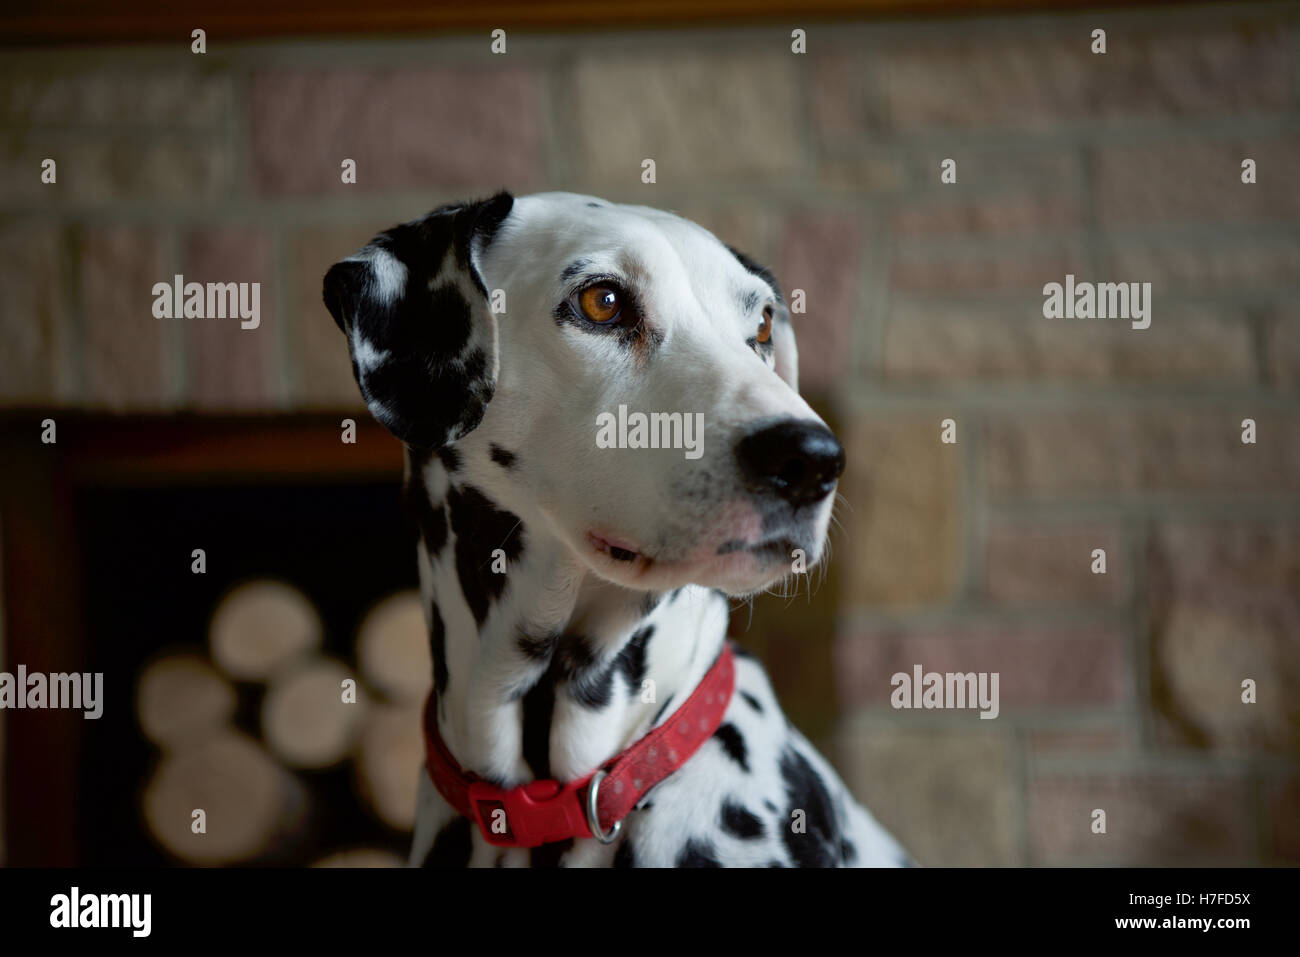 A Dalmatian dog, bright eyed and thoughtful. Stock Photo